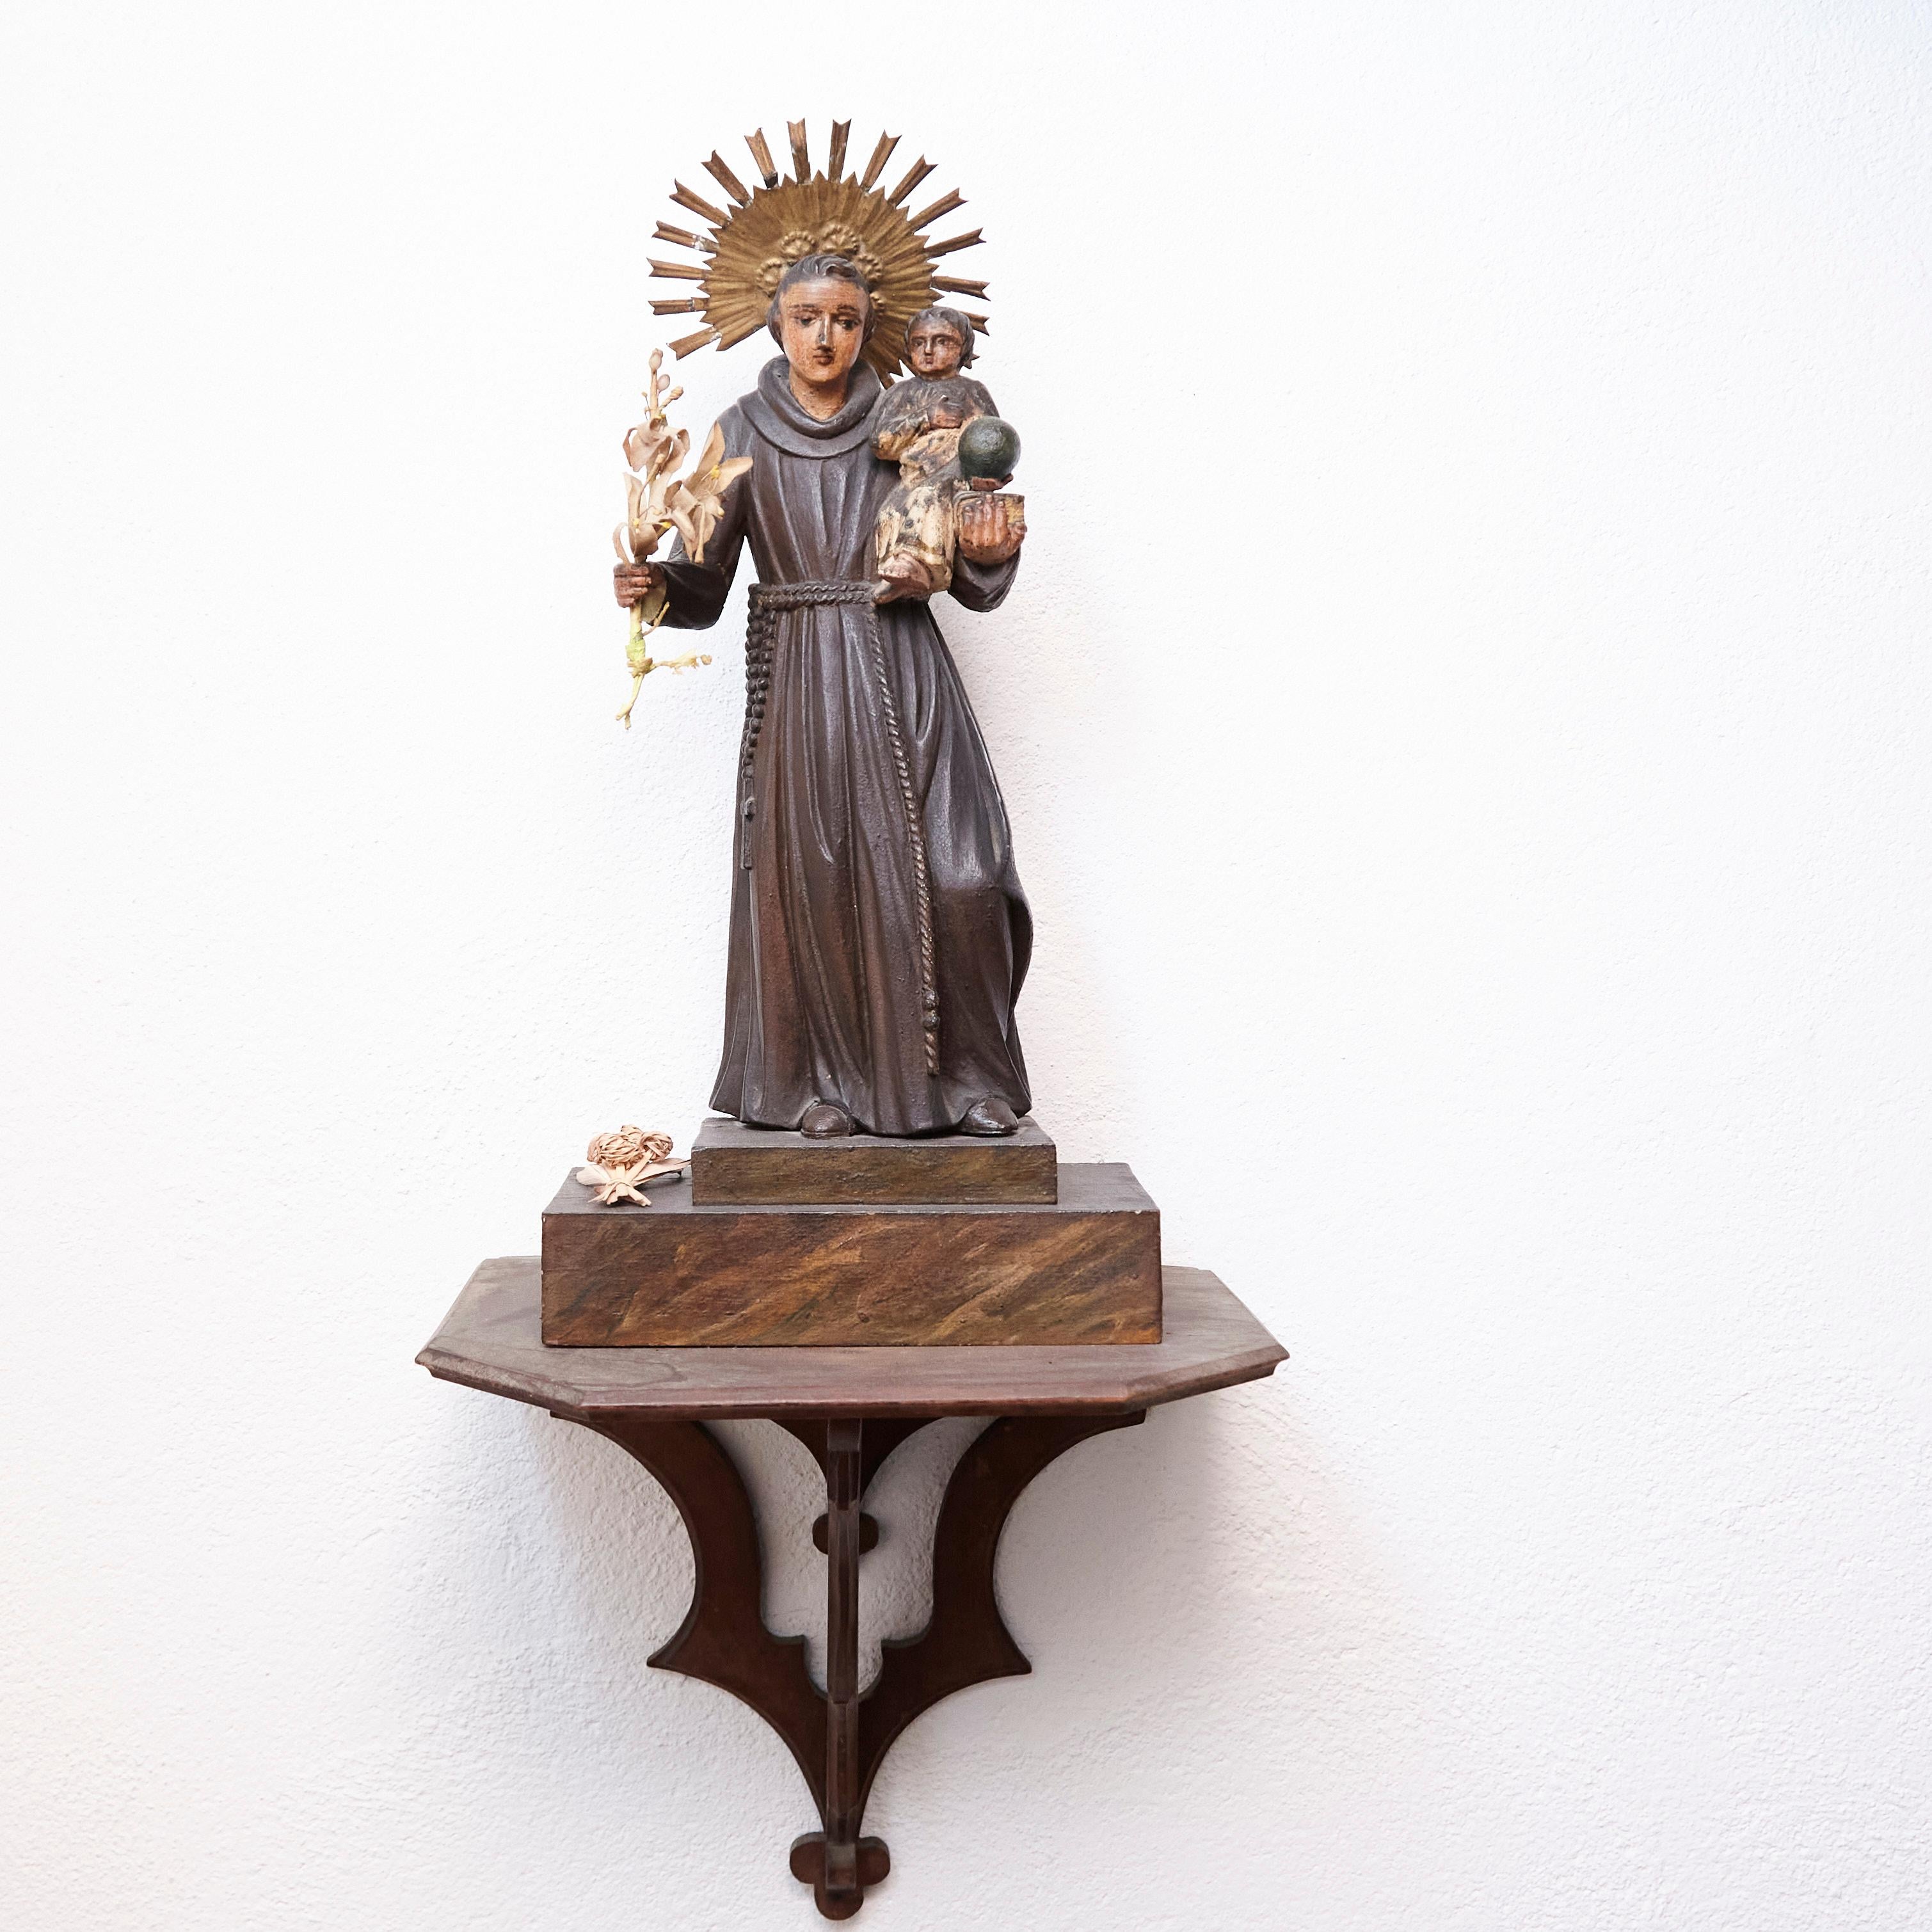 Traditional religious hand painted wood figure of a saint.

Made in traditional Catalan atelier in Olot, Spain, circa 1950.

In original condition, with minor wear consistent with age and use, preserving a beautiful patina.

Olot has a long